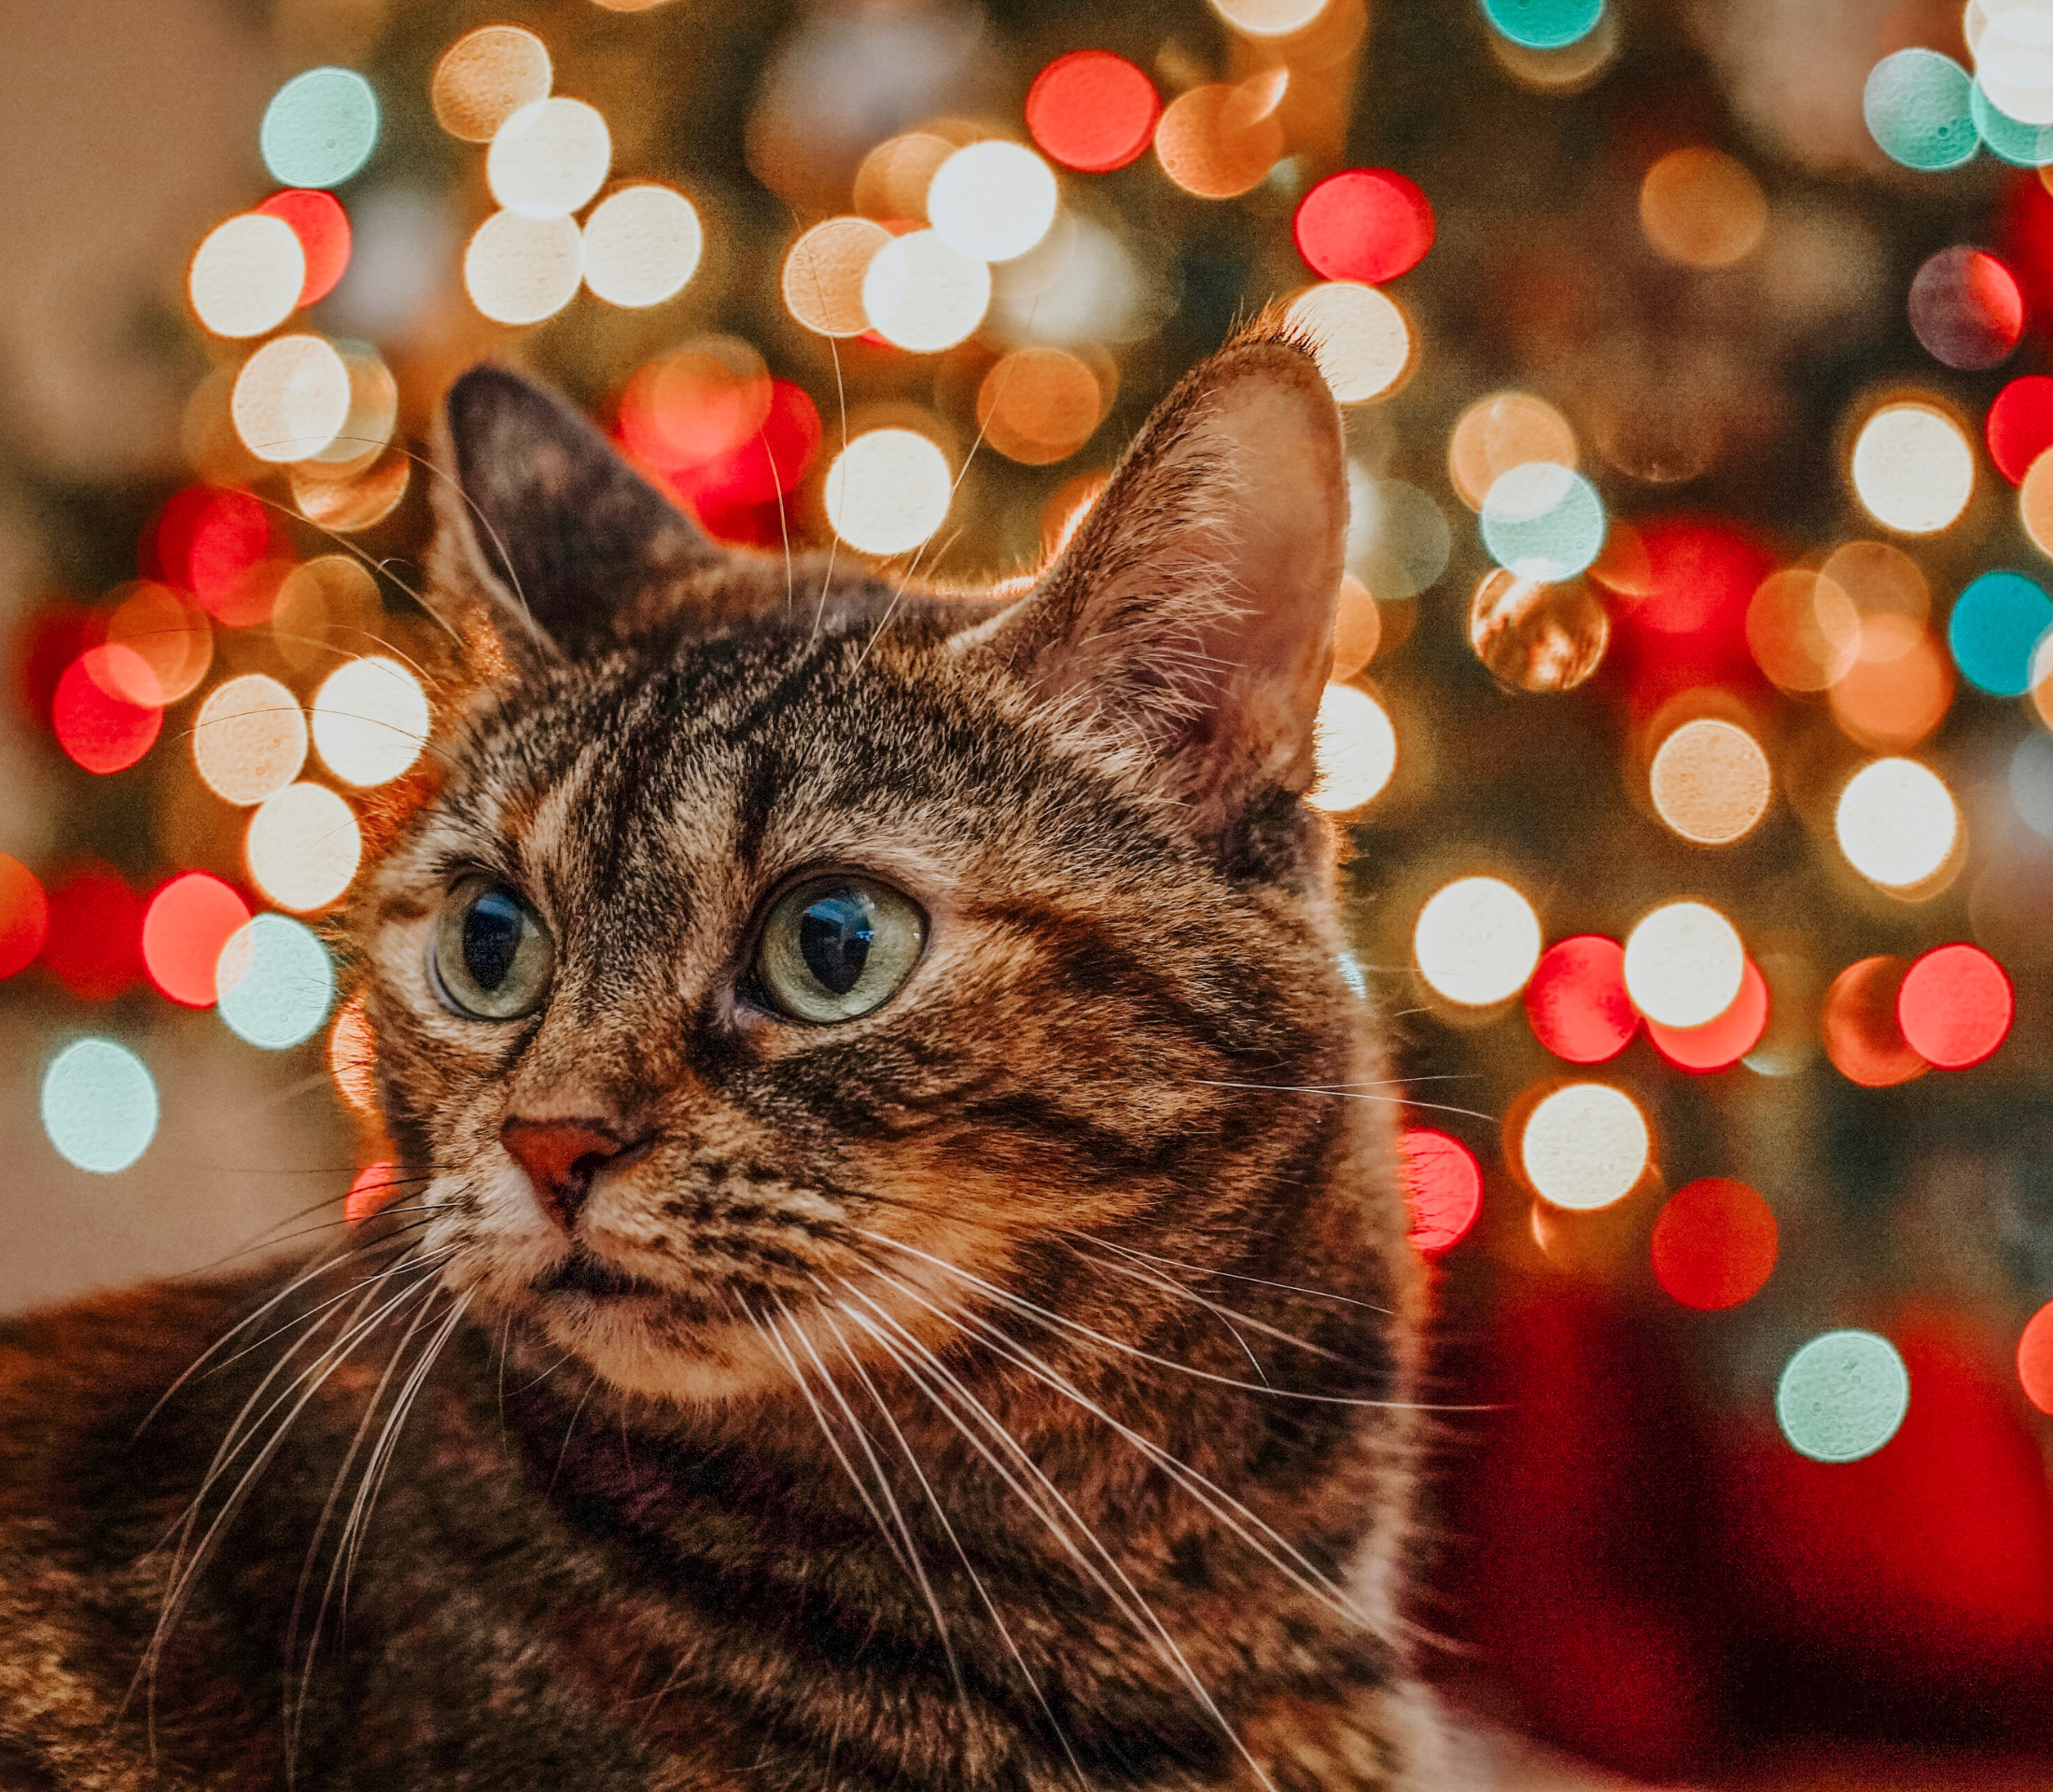 Tabby cat with christmas lights on the background